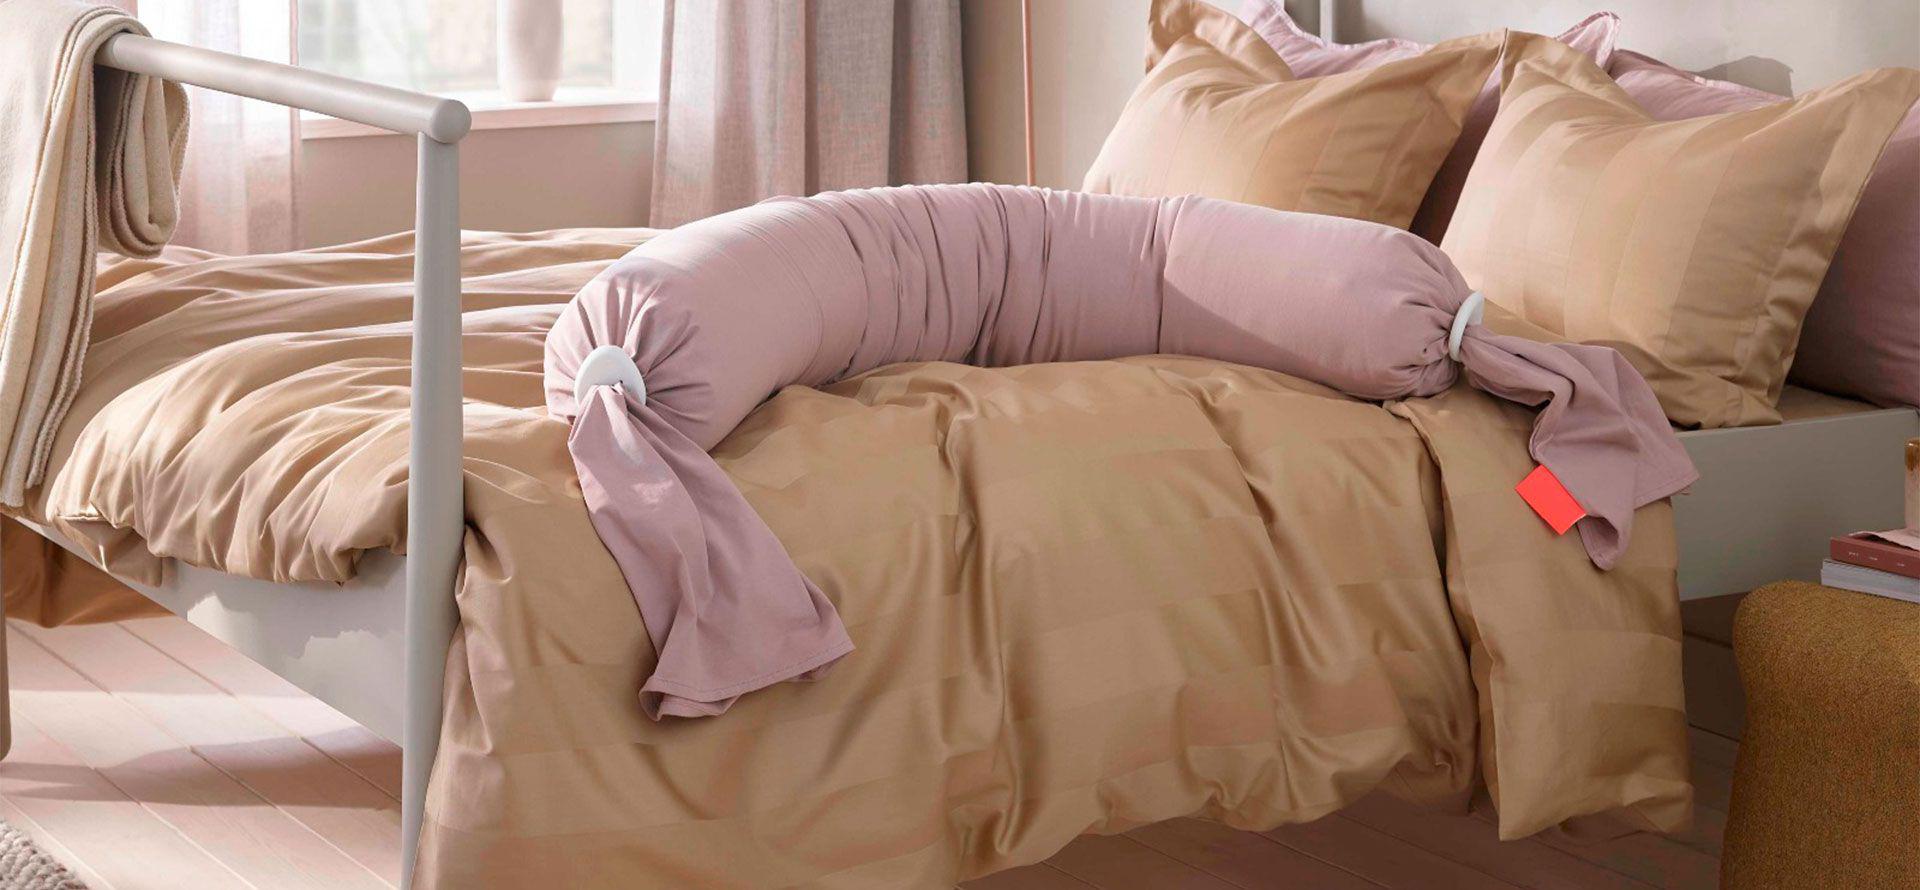 Pregnancy pillow on the bed.